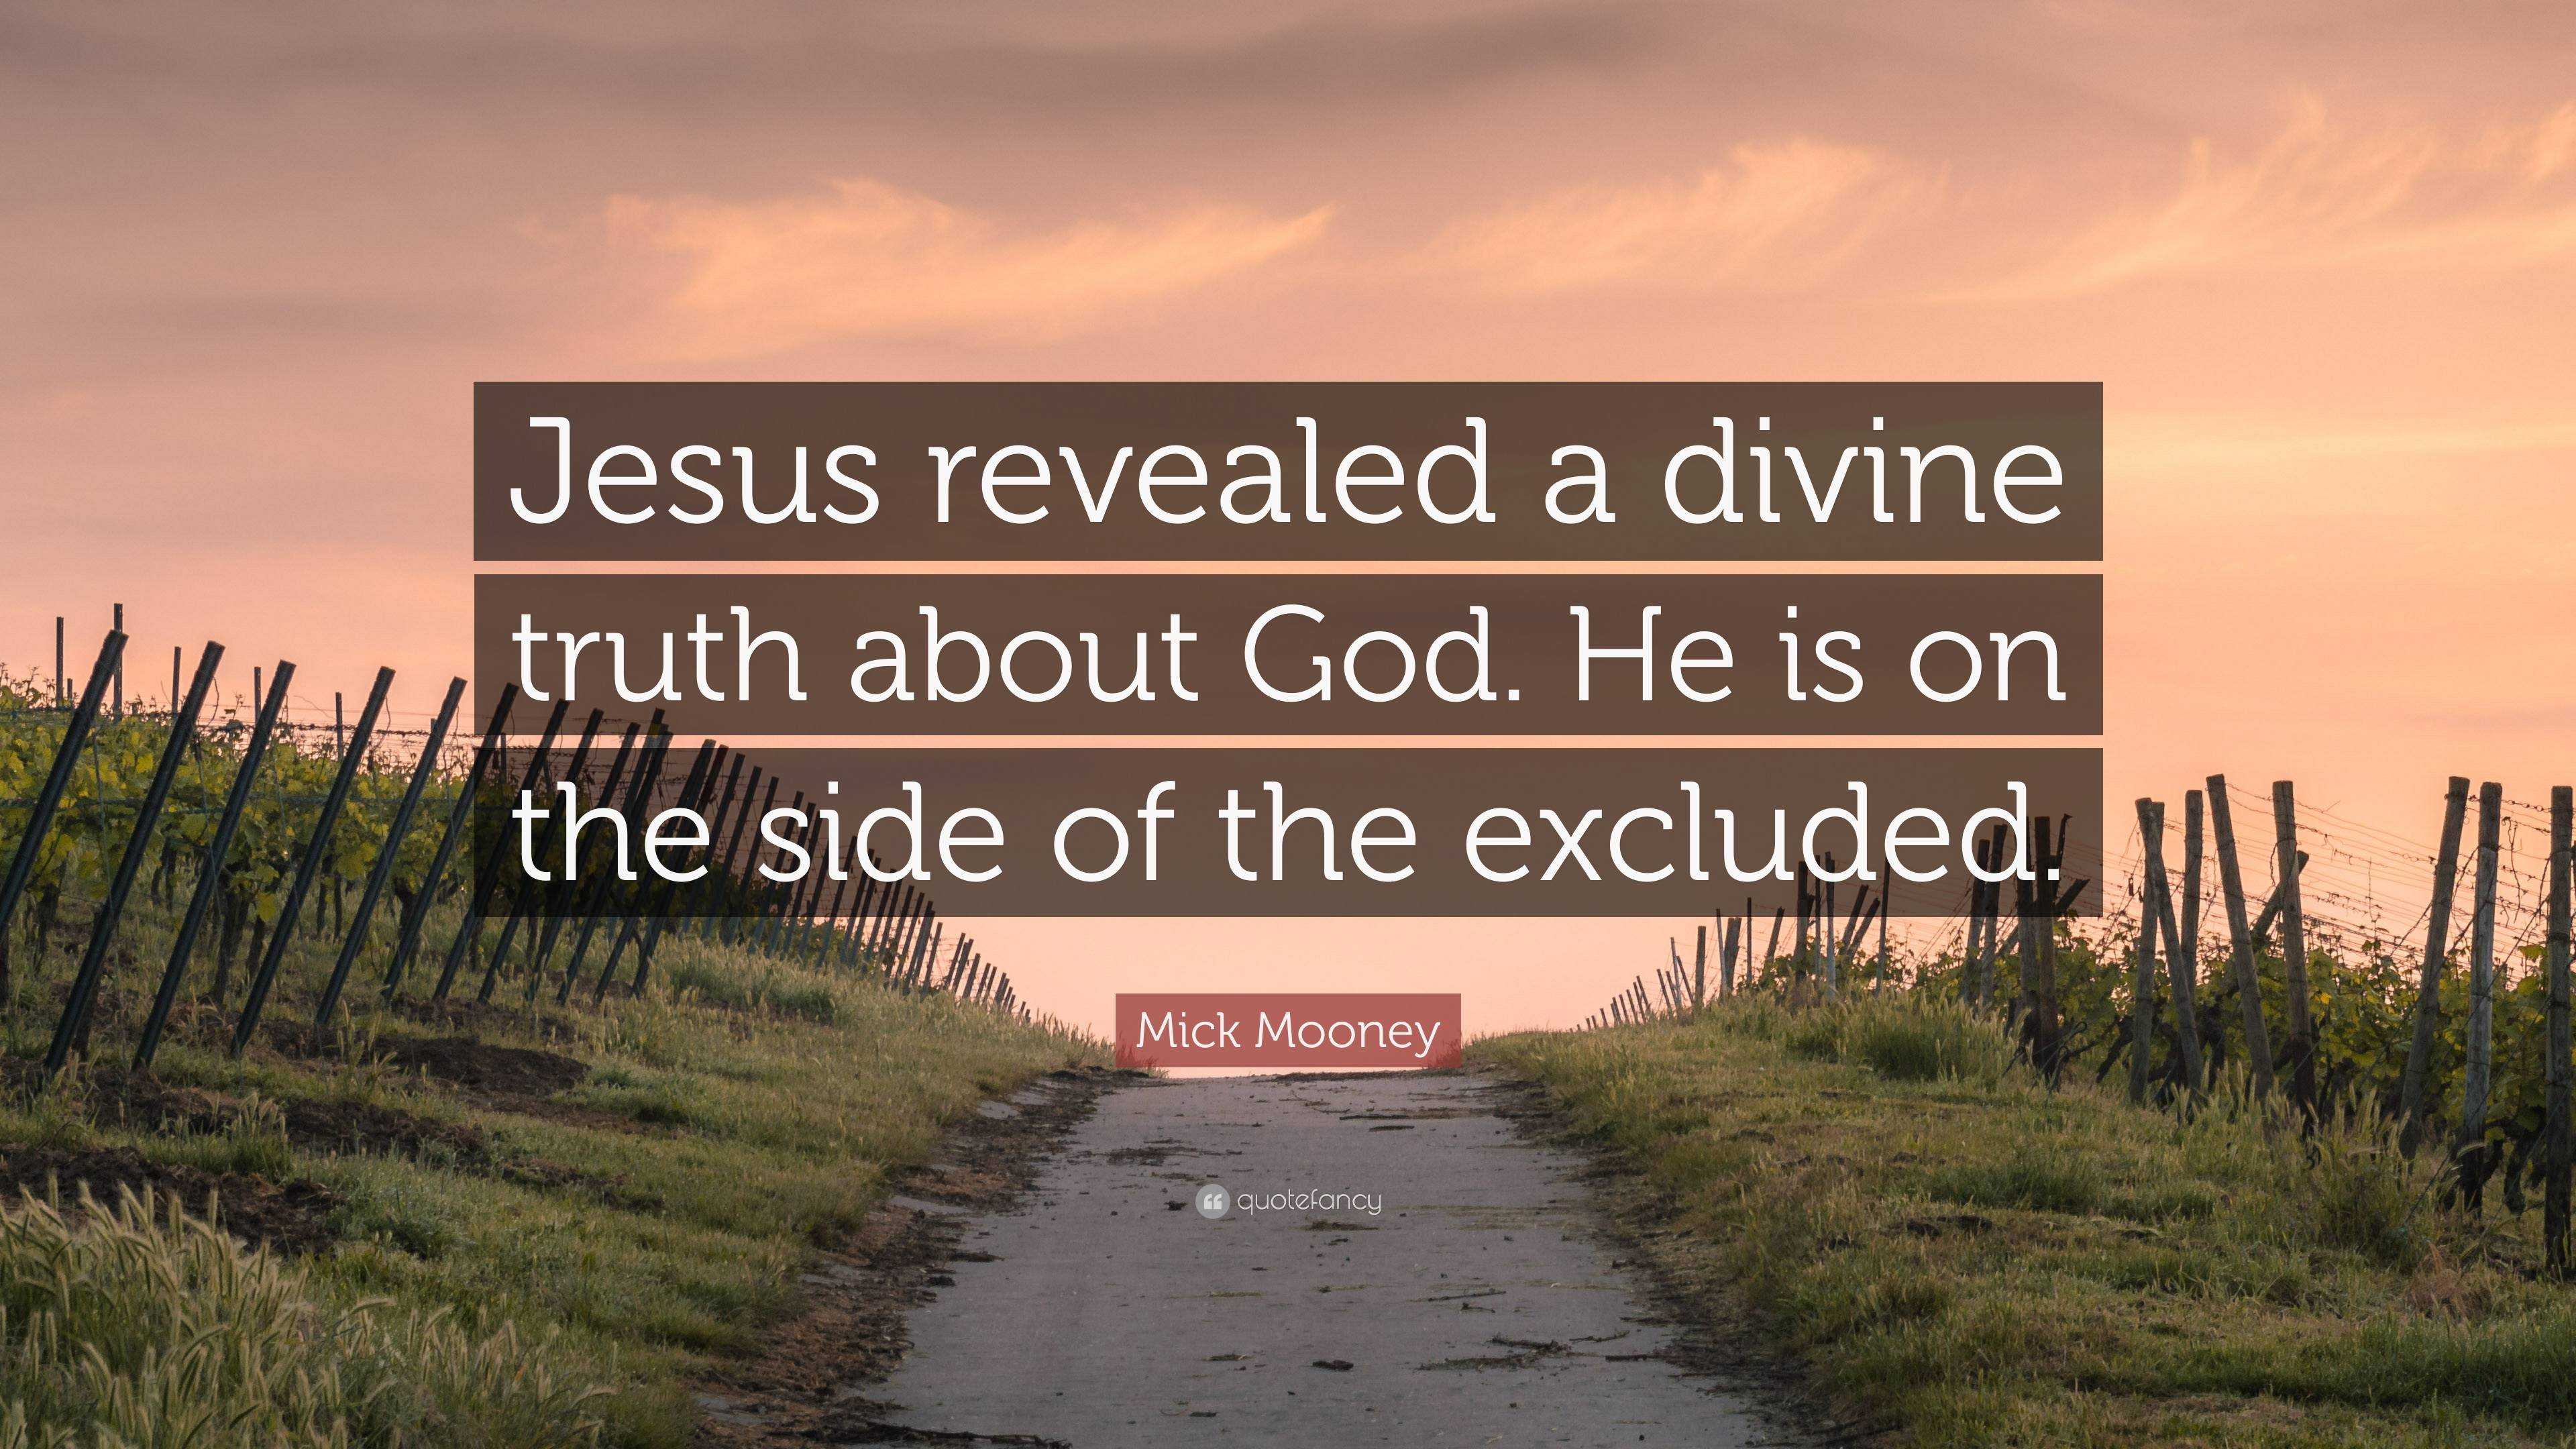 Mick Mooney Quote: “Jesus revealed a divine truth about God. He is on ...